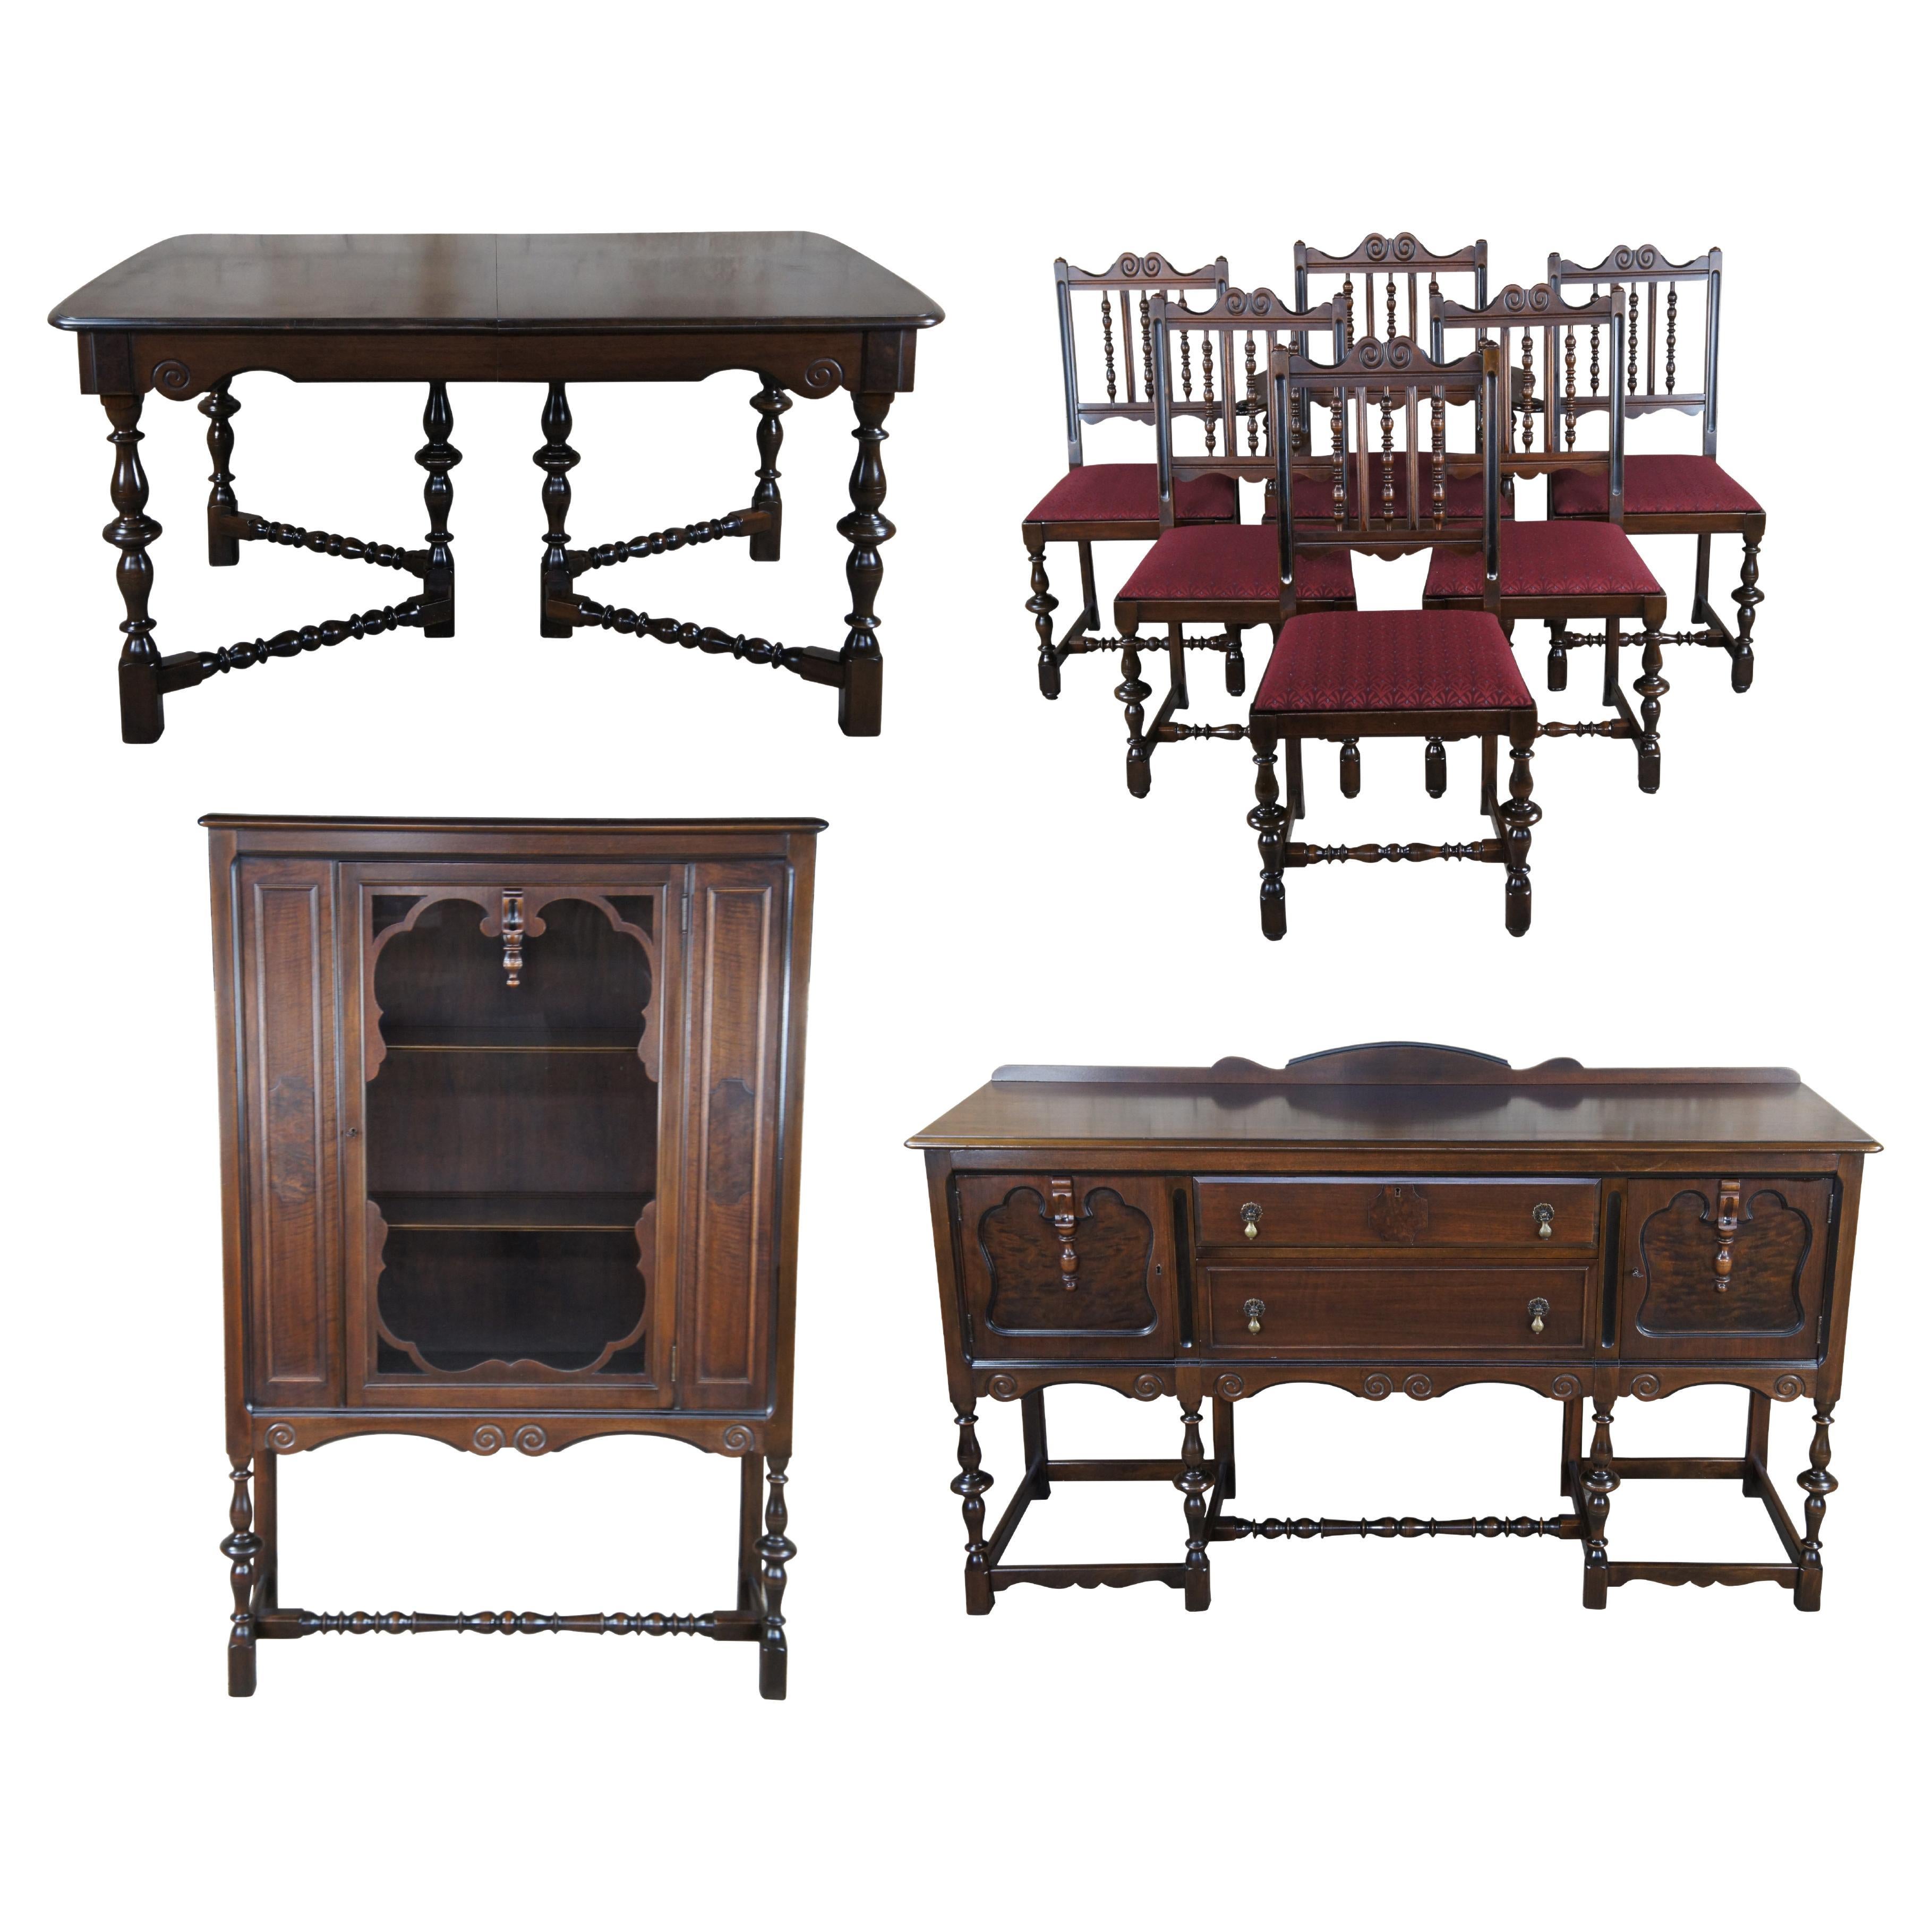 Antique Grand Rapids Chair Co. William & Mary Walnut Dining Room Set